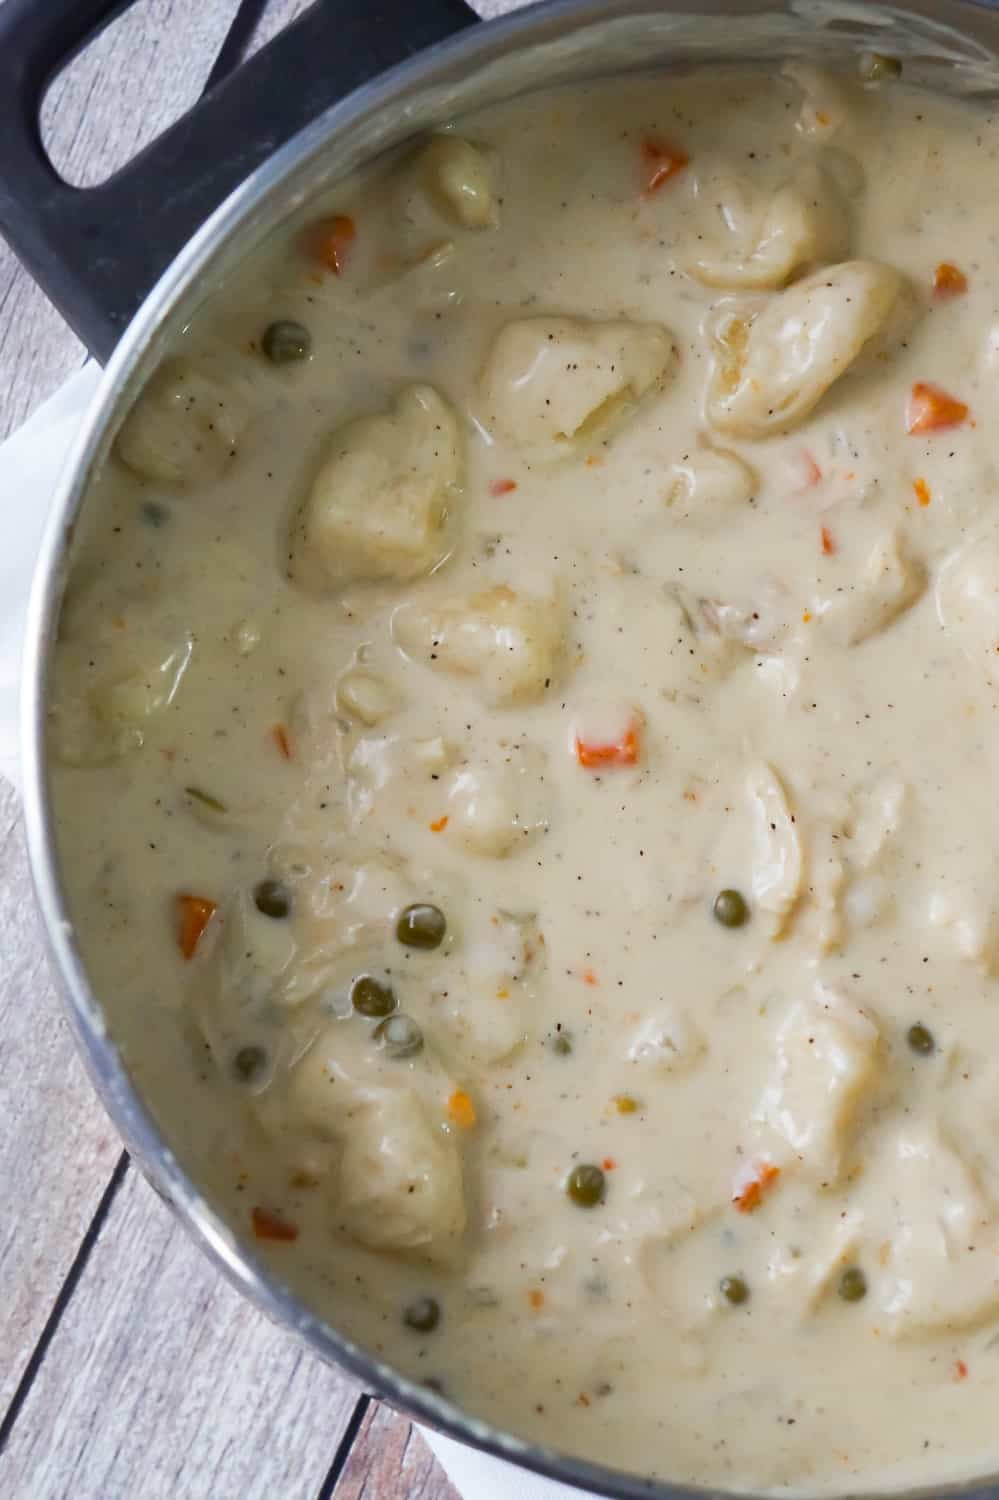 Chicken And Dumplings Using Biscuits
 Easy Chicken and Dumplings with Biscuits This is Not